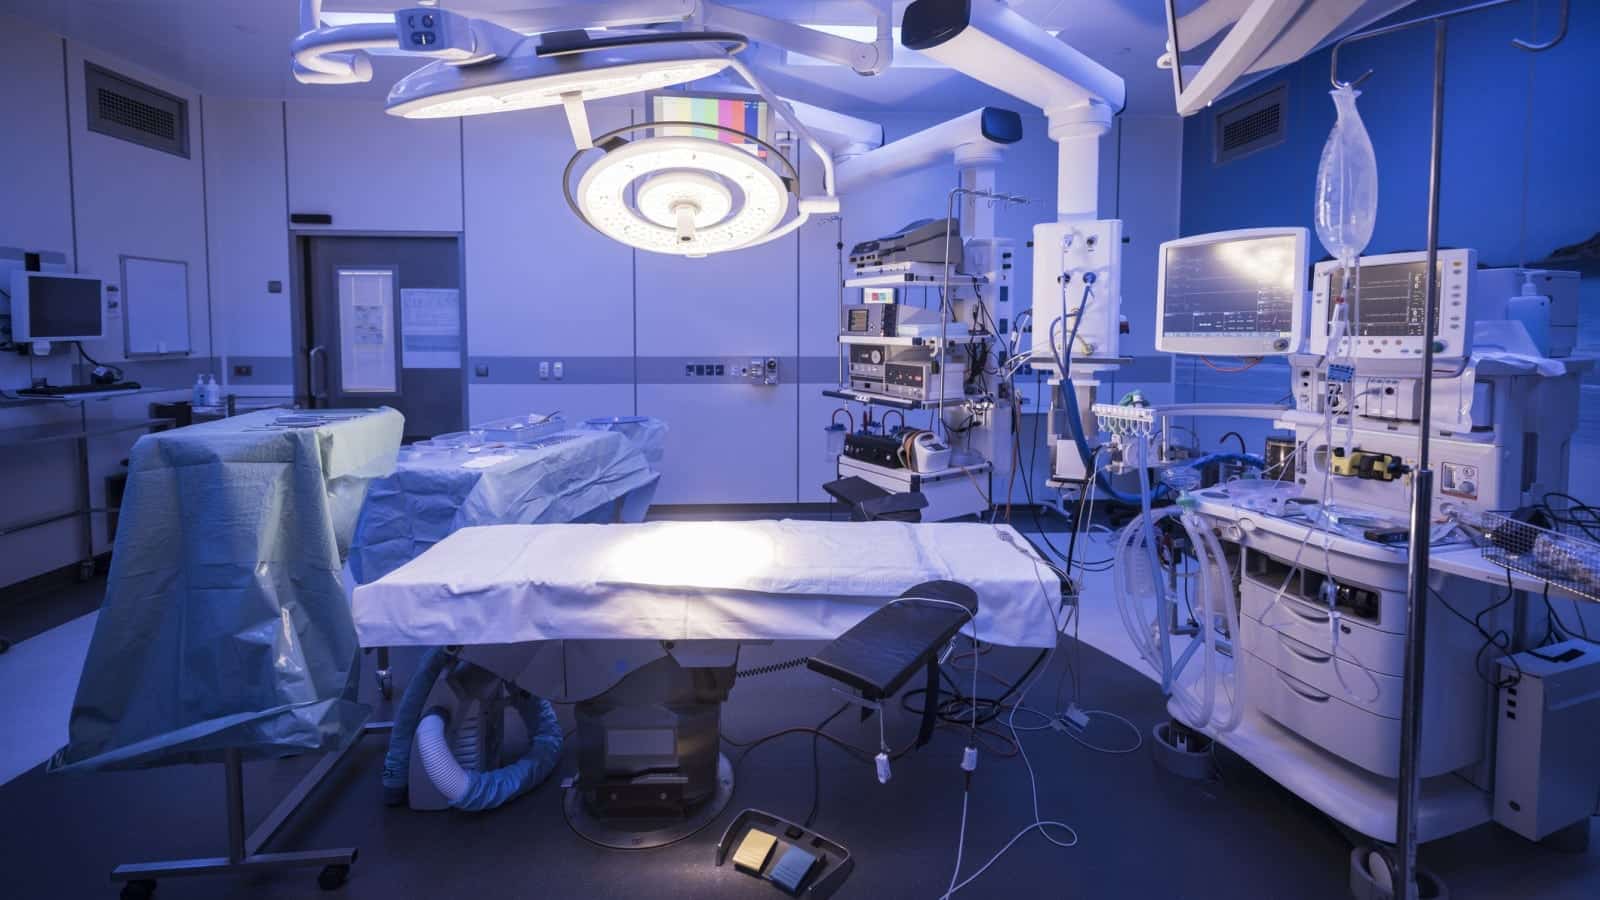 Empty hospital operating theatre with lighting over bed